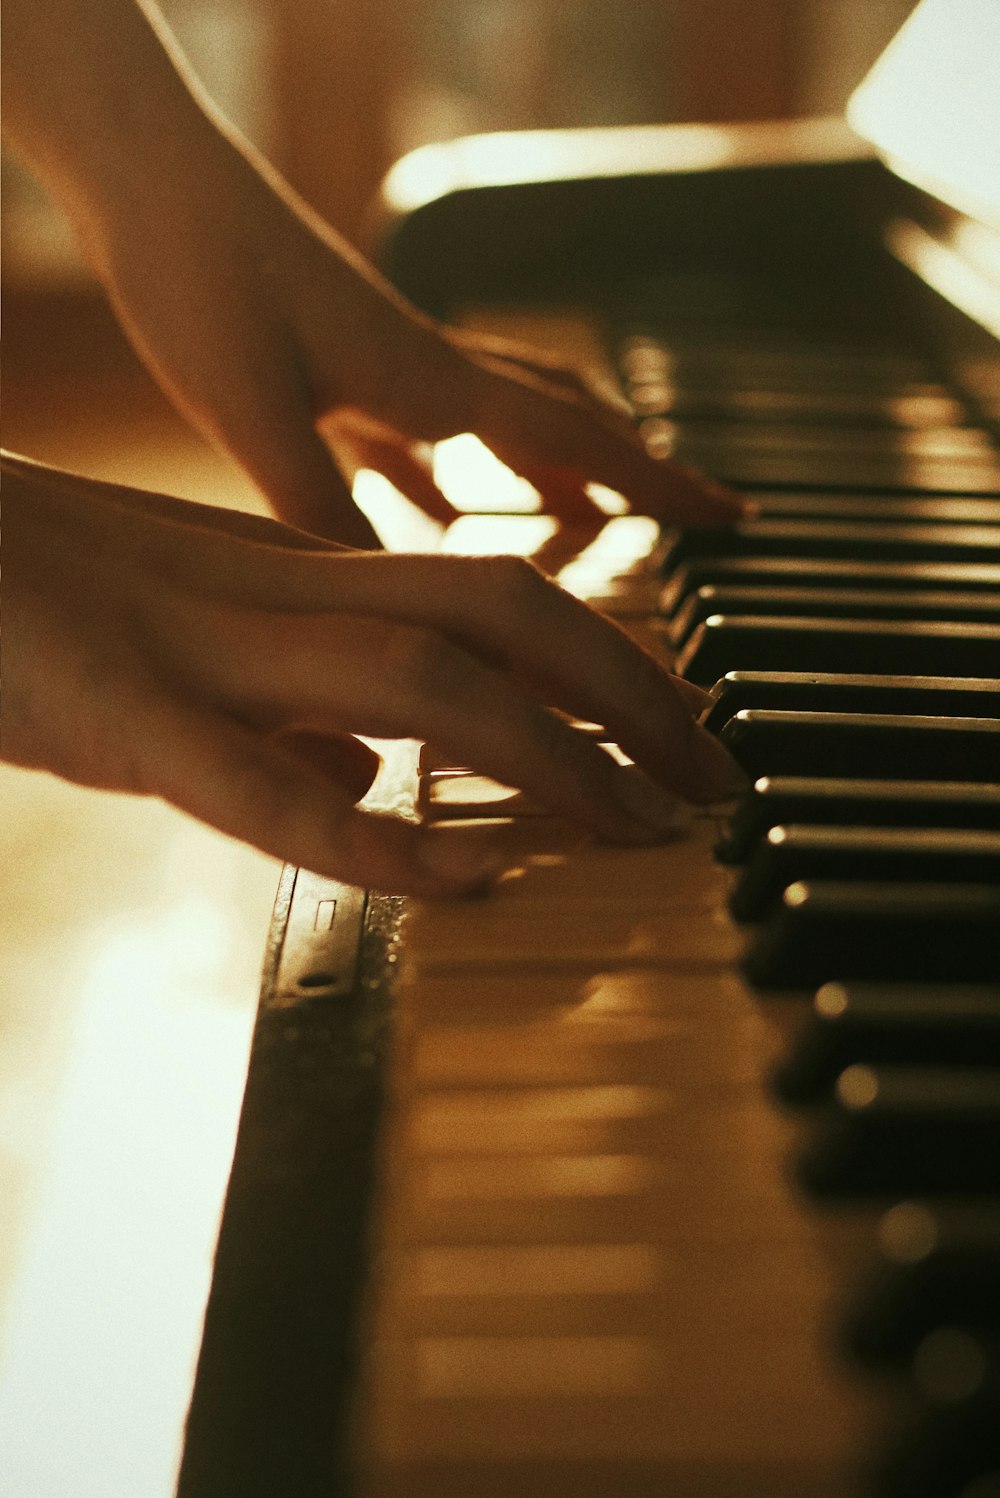 person playing piano during daytime photo – Free Piano Image on Unsplash